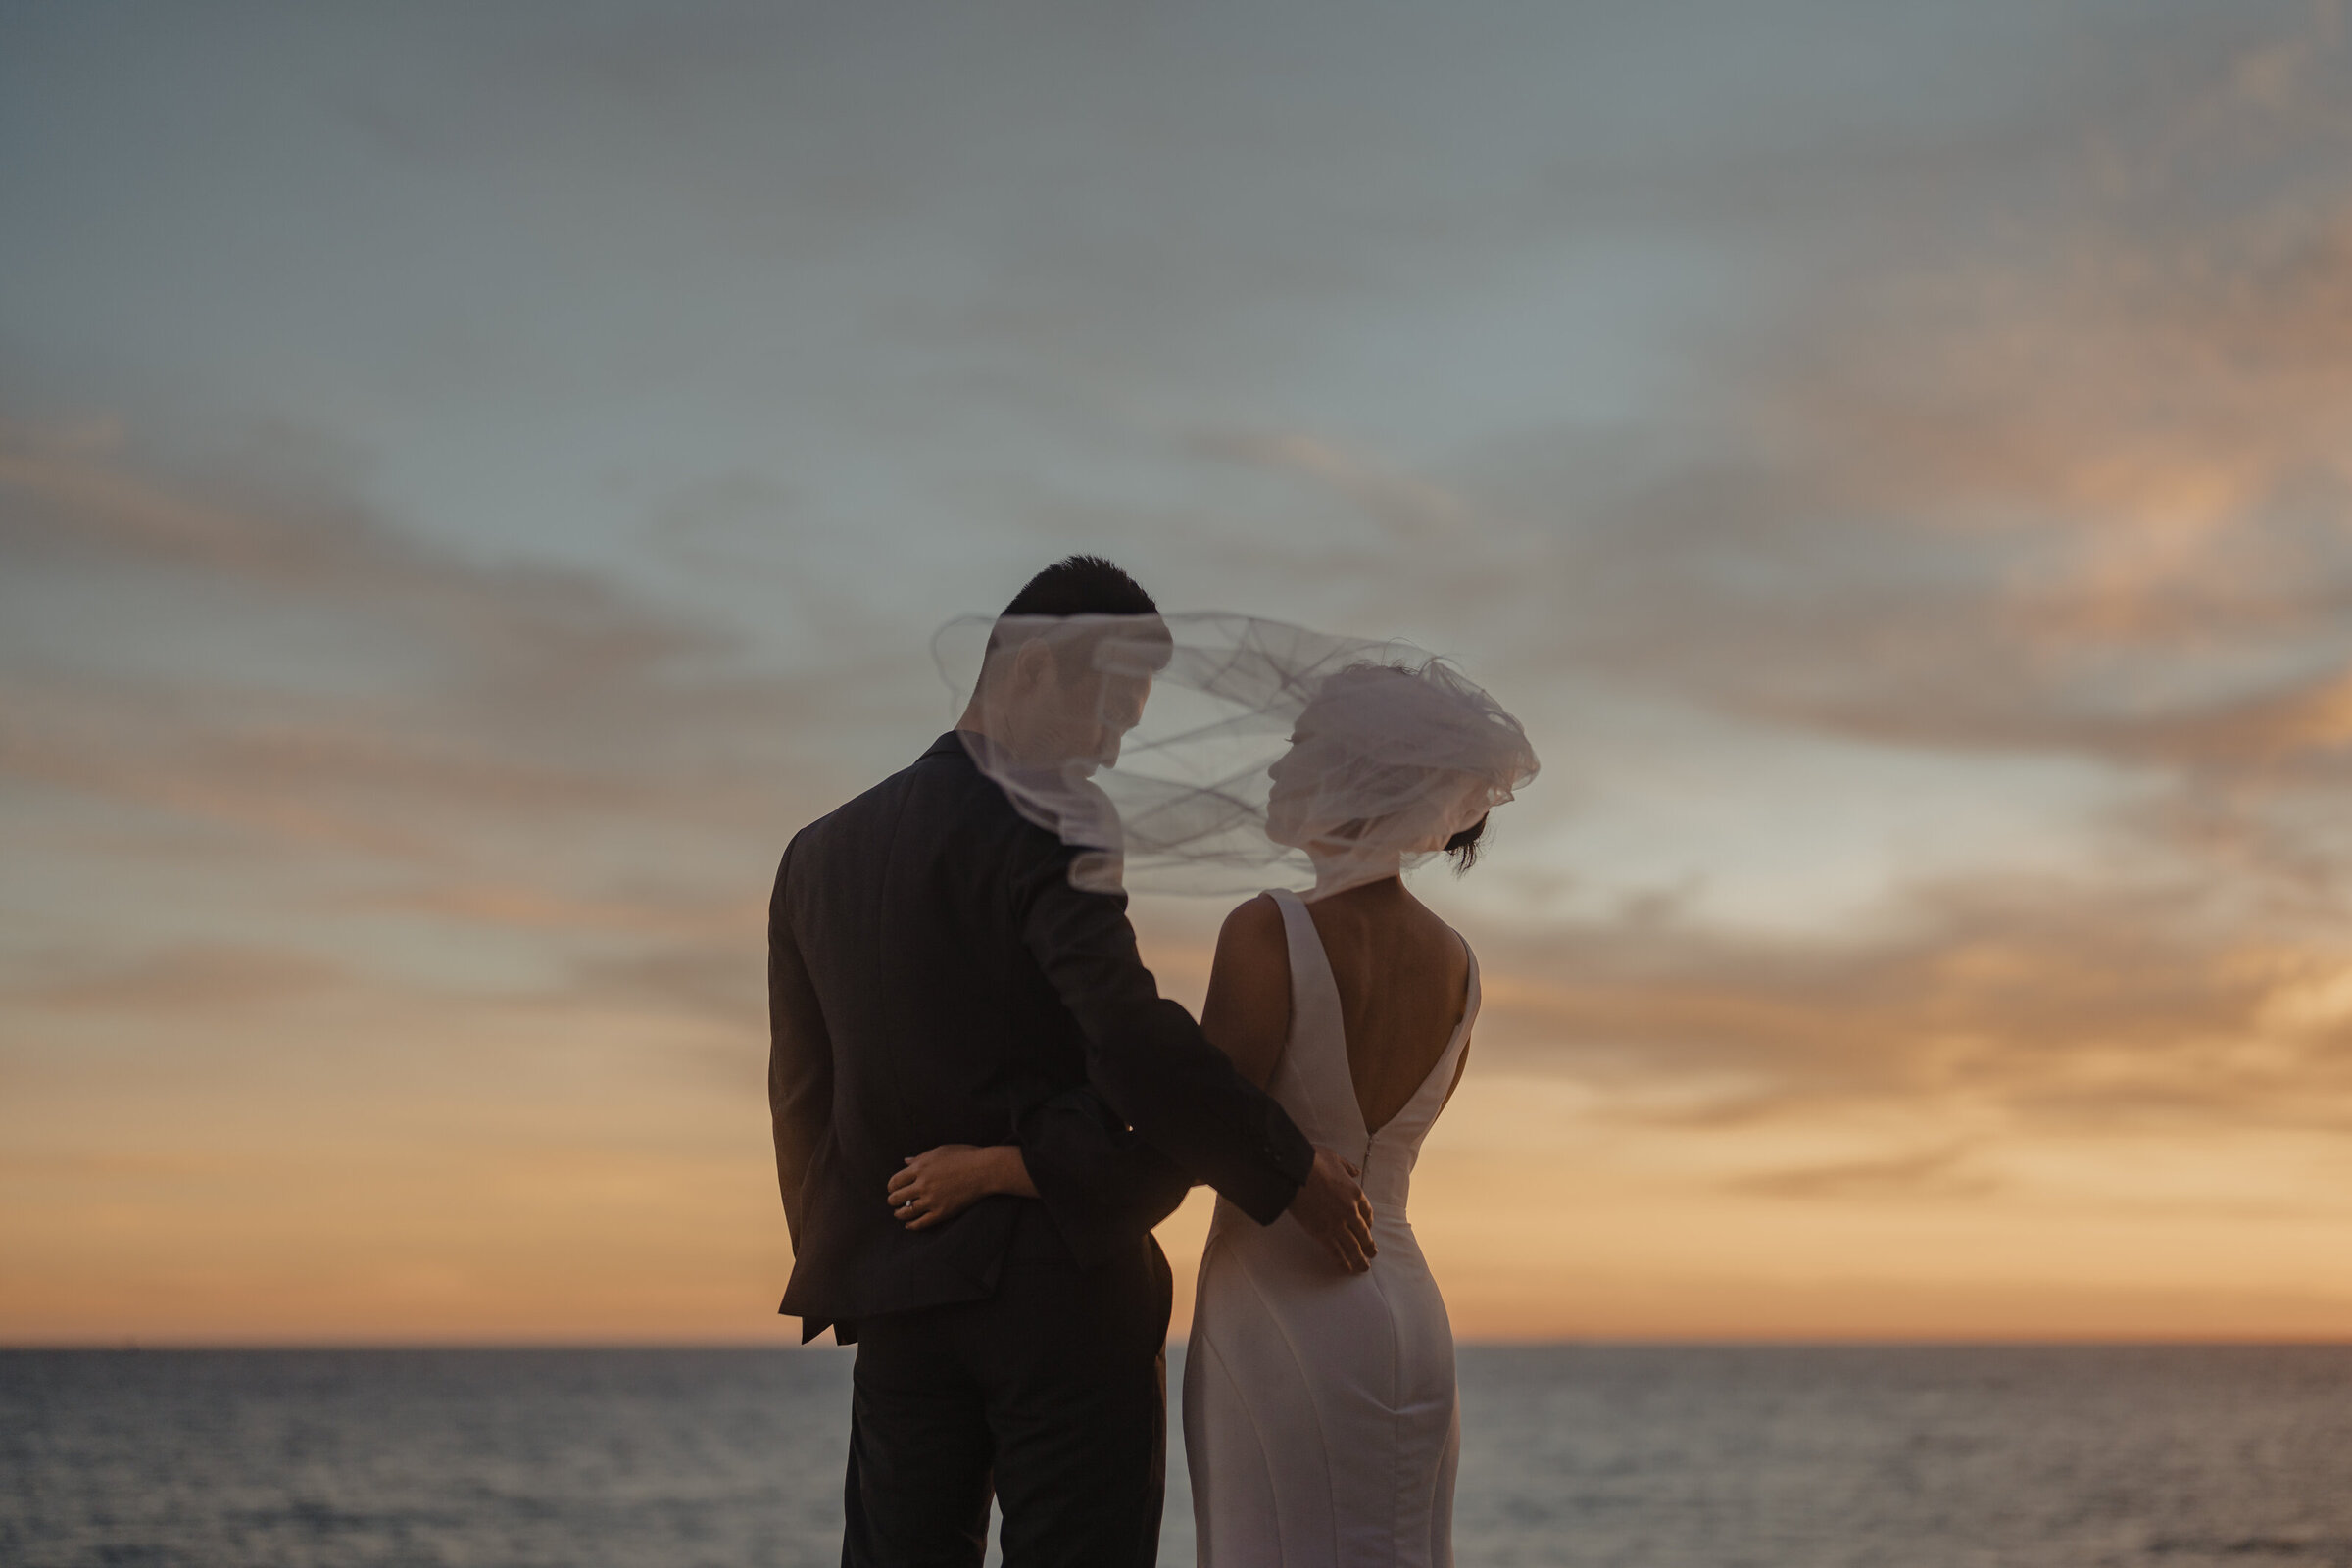 Breathtaking sunset beach vows in Los Angeles, a perfect romantic wedding moment